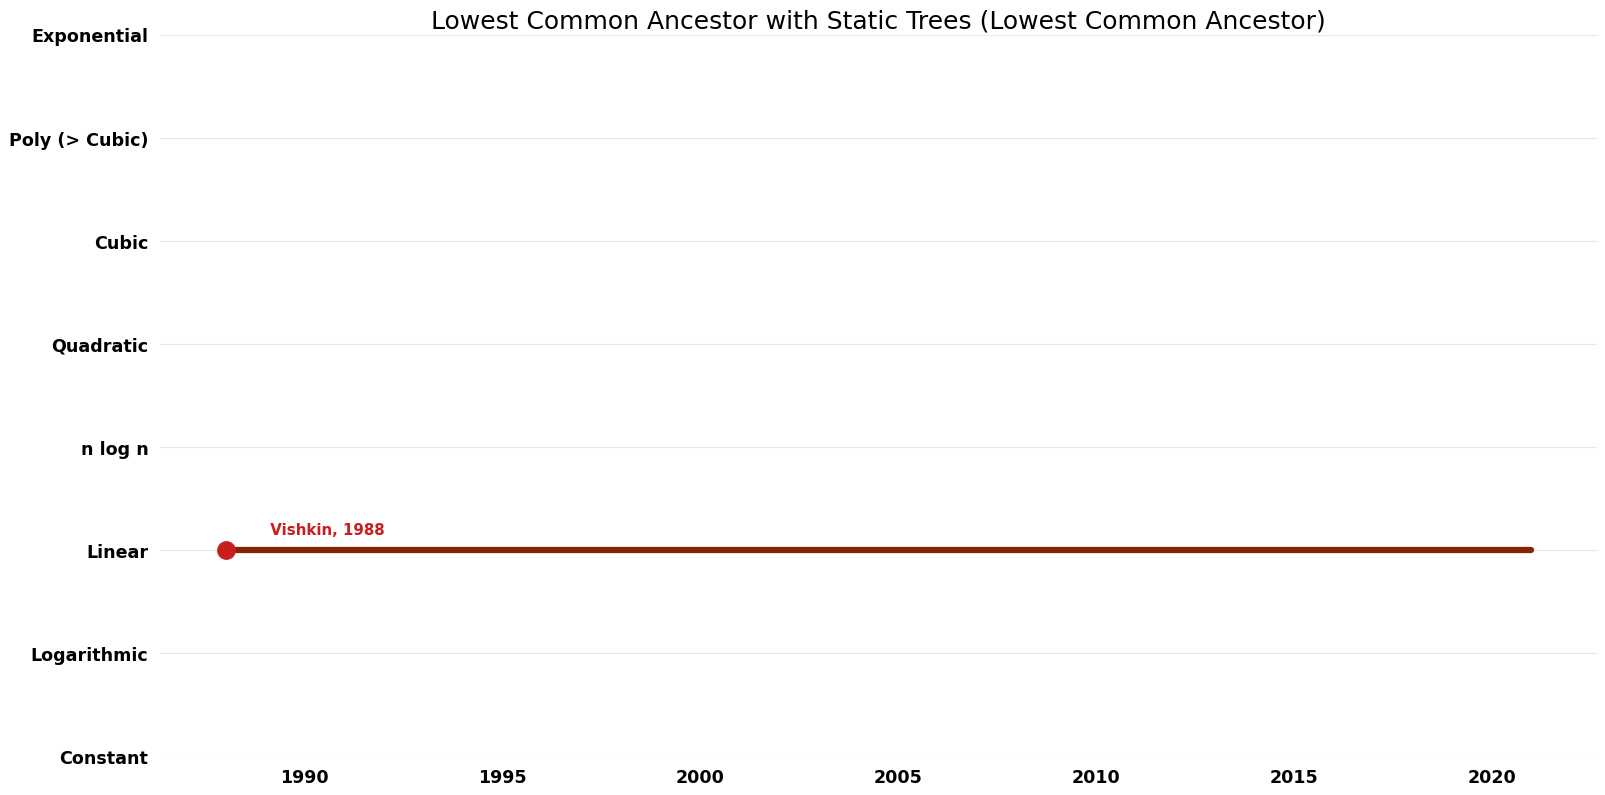 File:Lowest Common Ancestor - Lowest Common Ancestor with Static Trees - Time.png